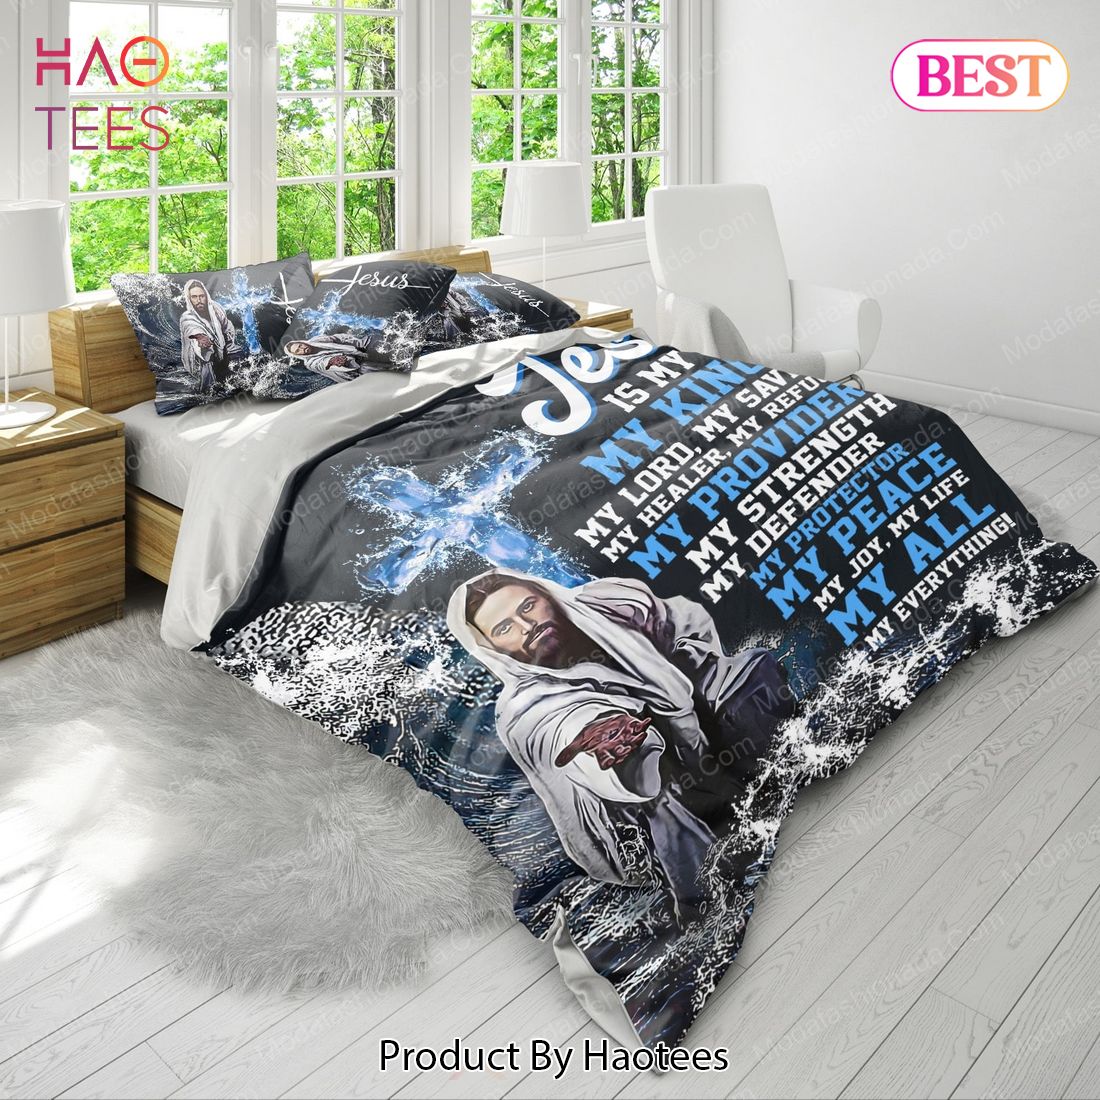 Buy Jesus Is My God My King My Provider My Protector My Peace My All Bedding Sets Bed Sets, Bedroom Sets, Comforter Sets, Duvet Cover, Bedspread